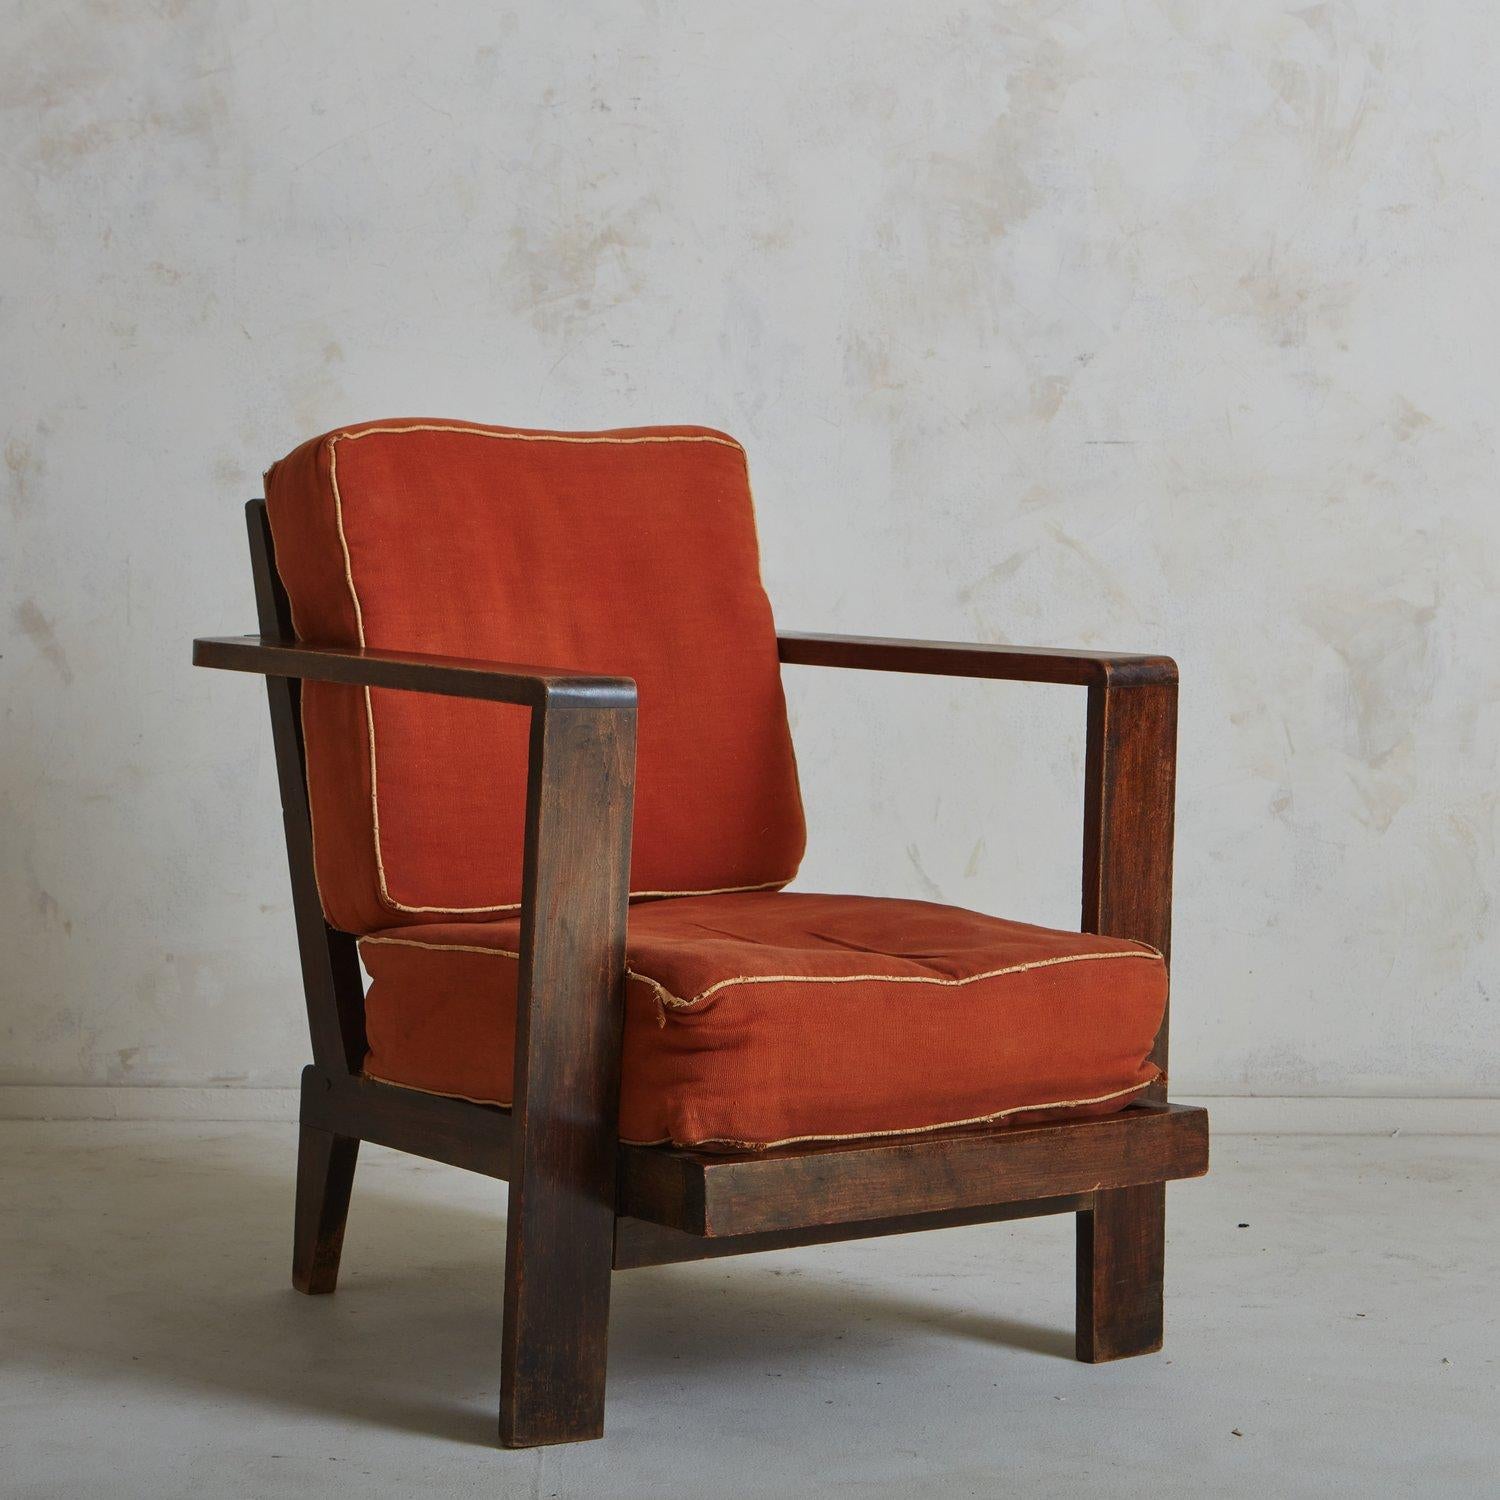 A Vintage French lounge chair in the style of Rene Gabriel featuring a stately wood frame with a rich brown stain. The arms of the chair elegantly wrap around the ladder back. It has tapered back legs and two removable cushions in original coral